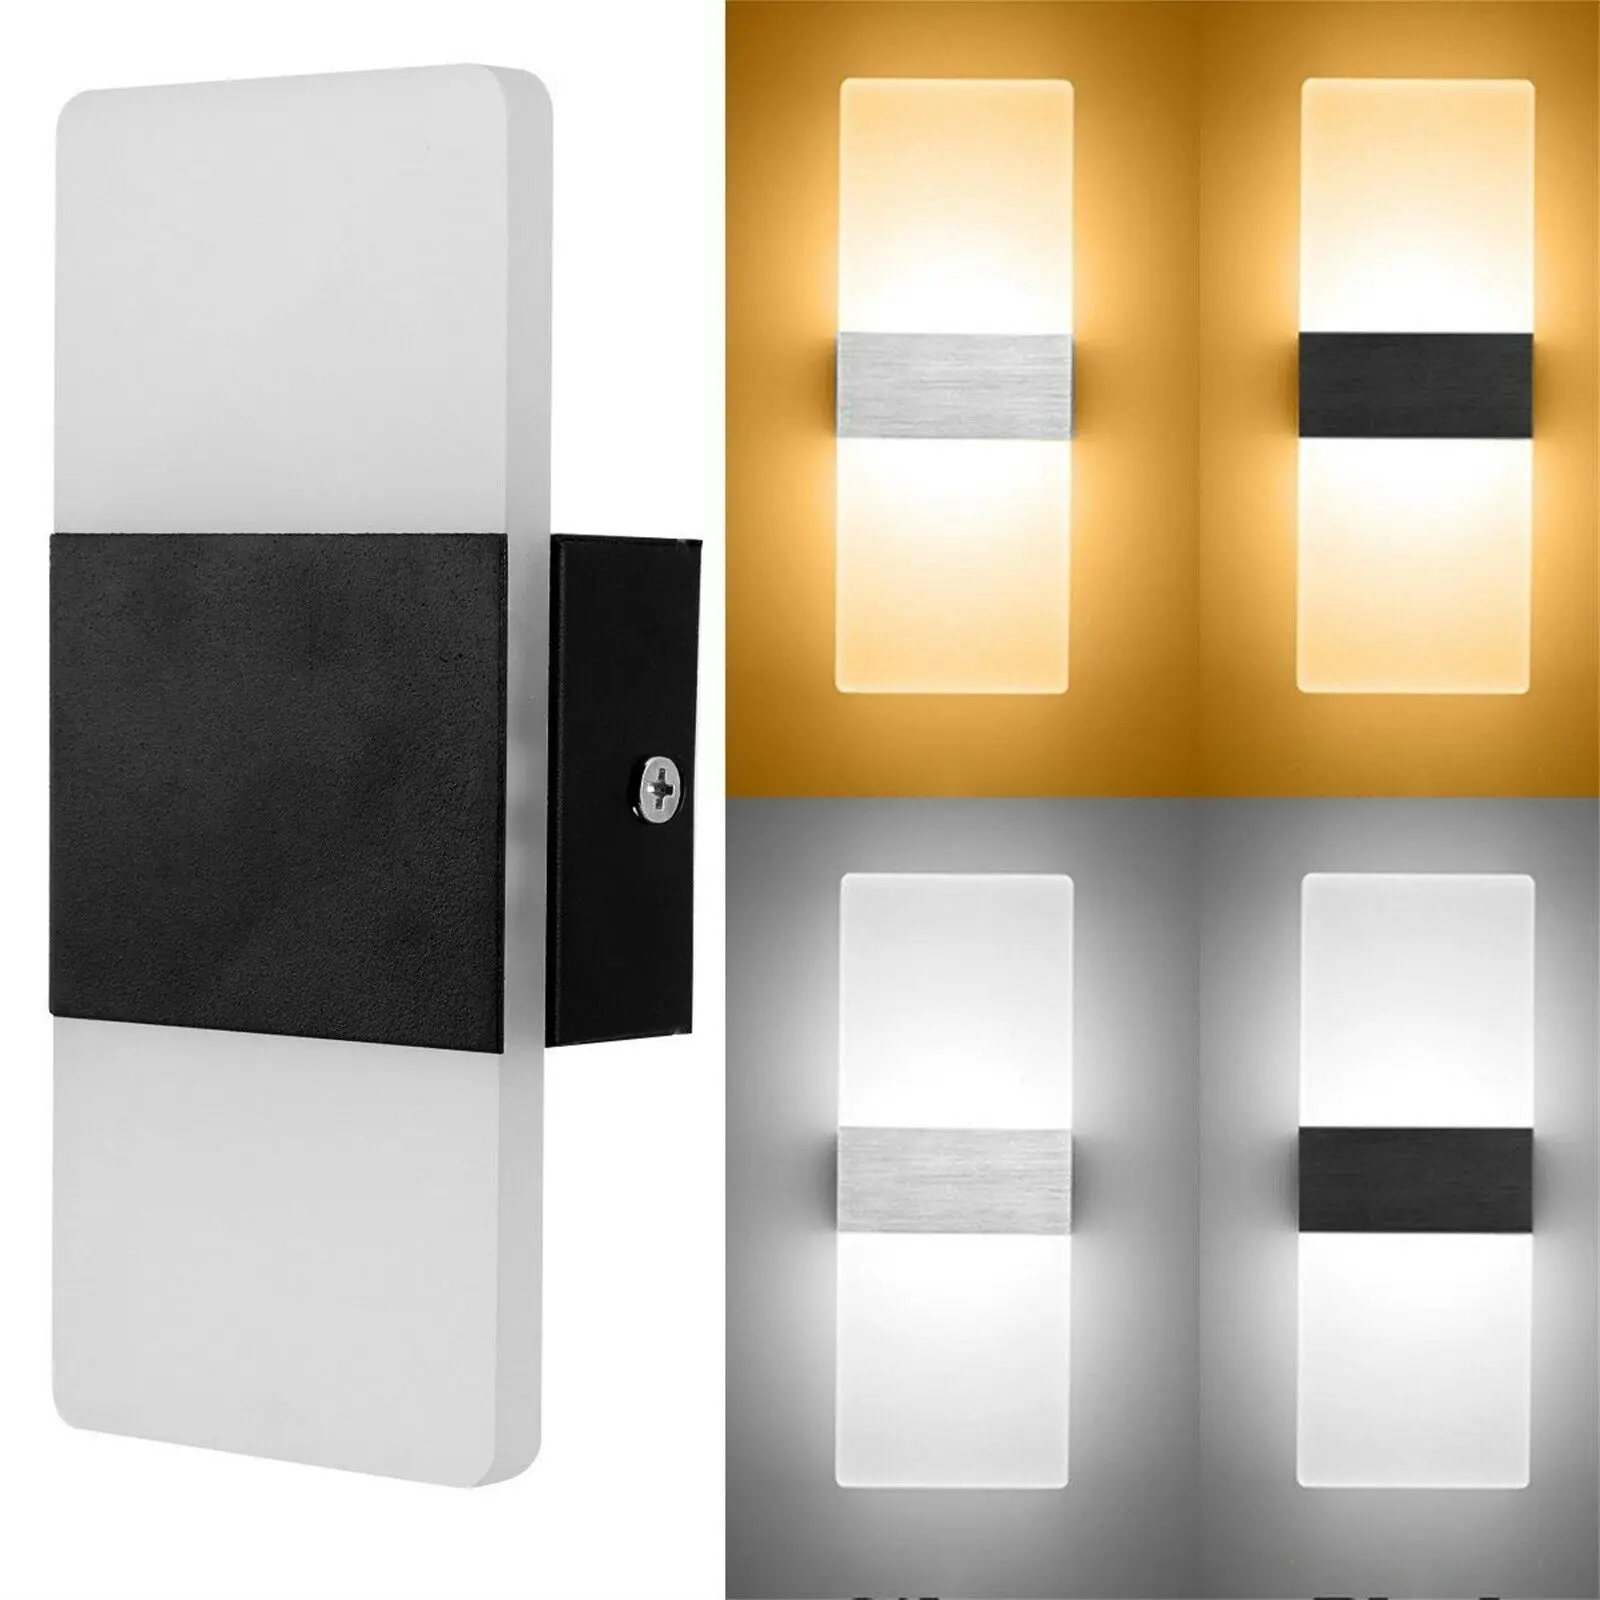 Modern LED Wall Light Up Down Cube Sconce Lighting Lamp Fixture Mount Room Decor 